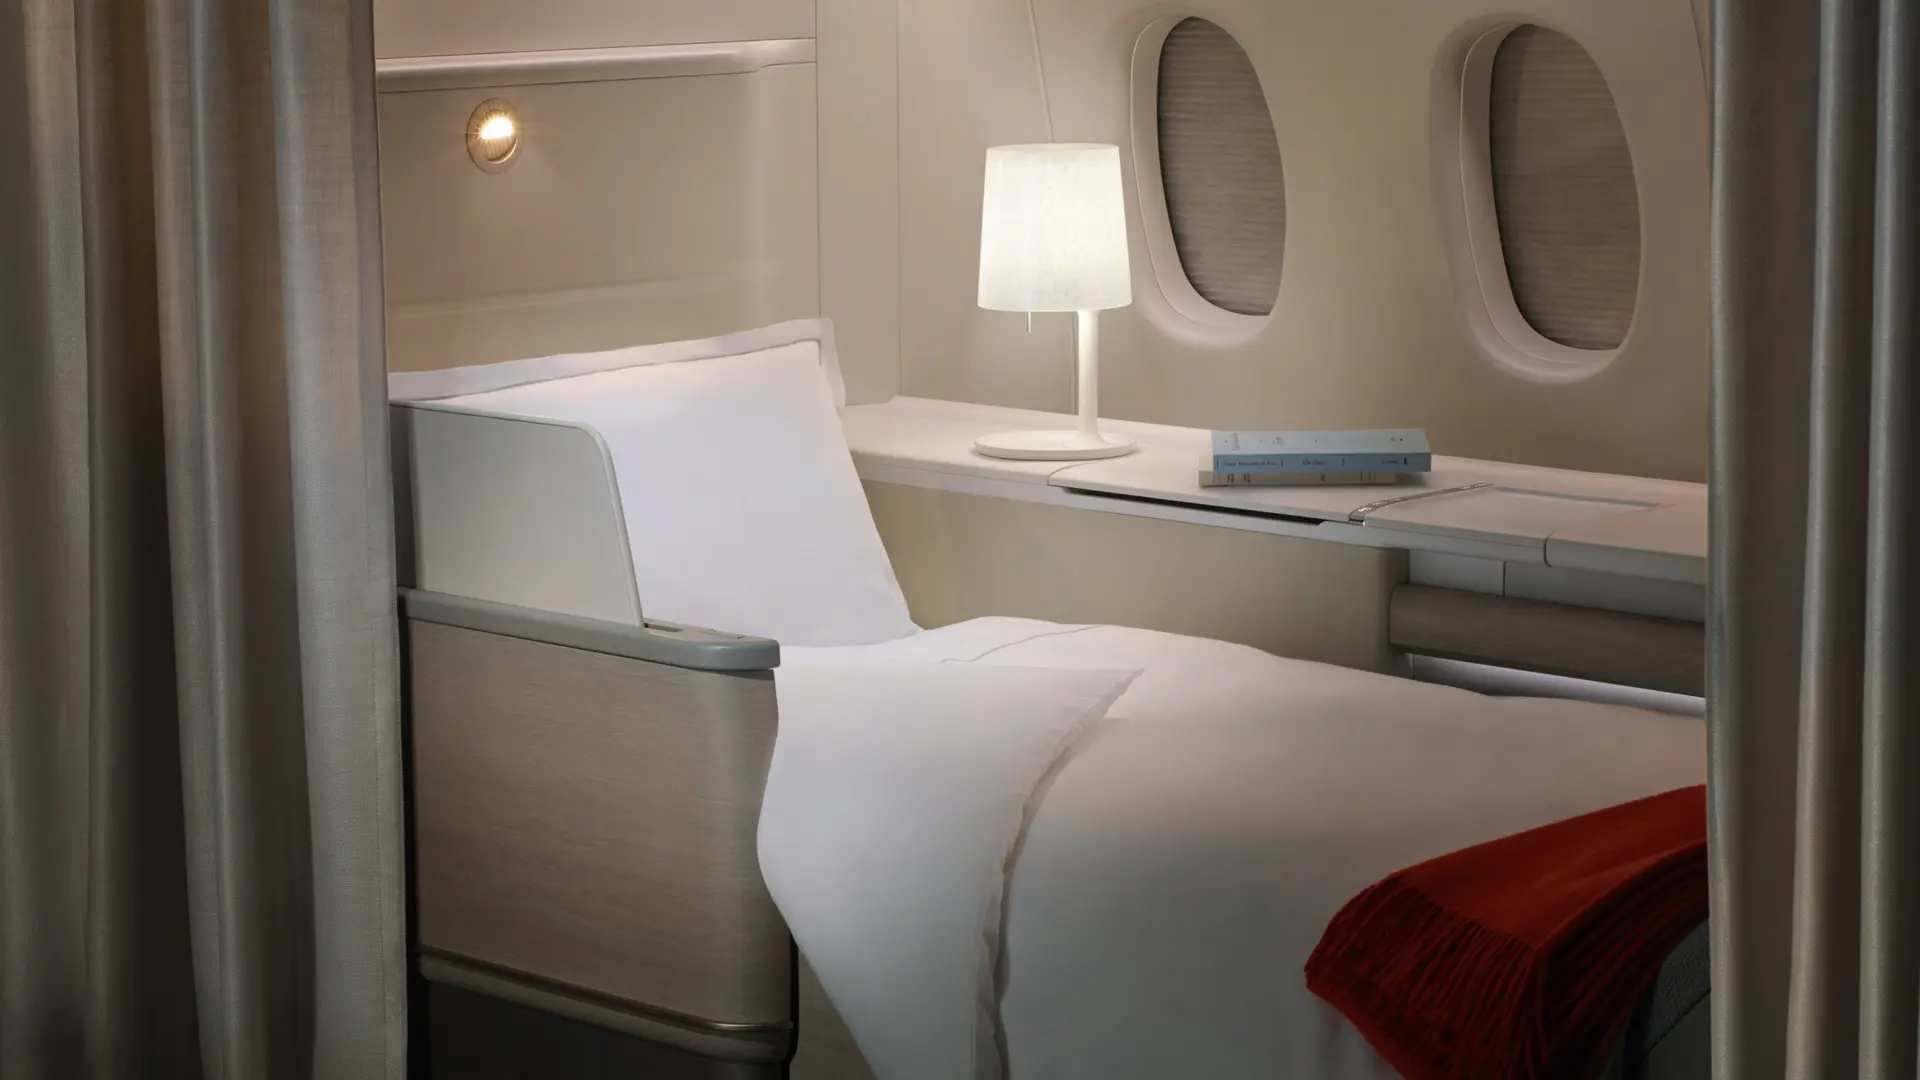 Airline review Cabin & Seat - Air France - 5